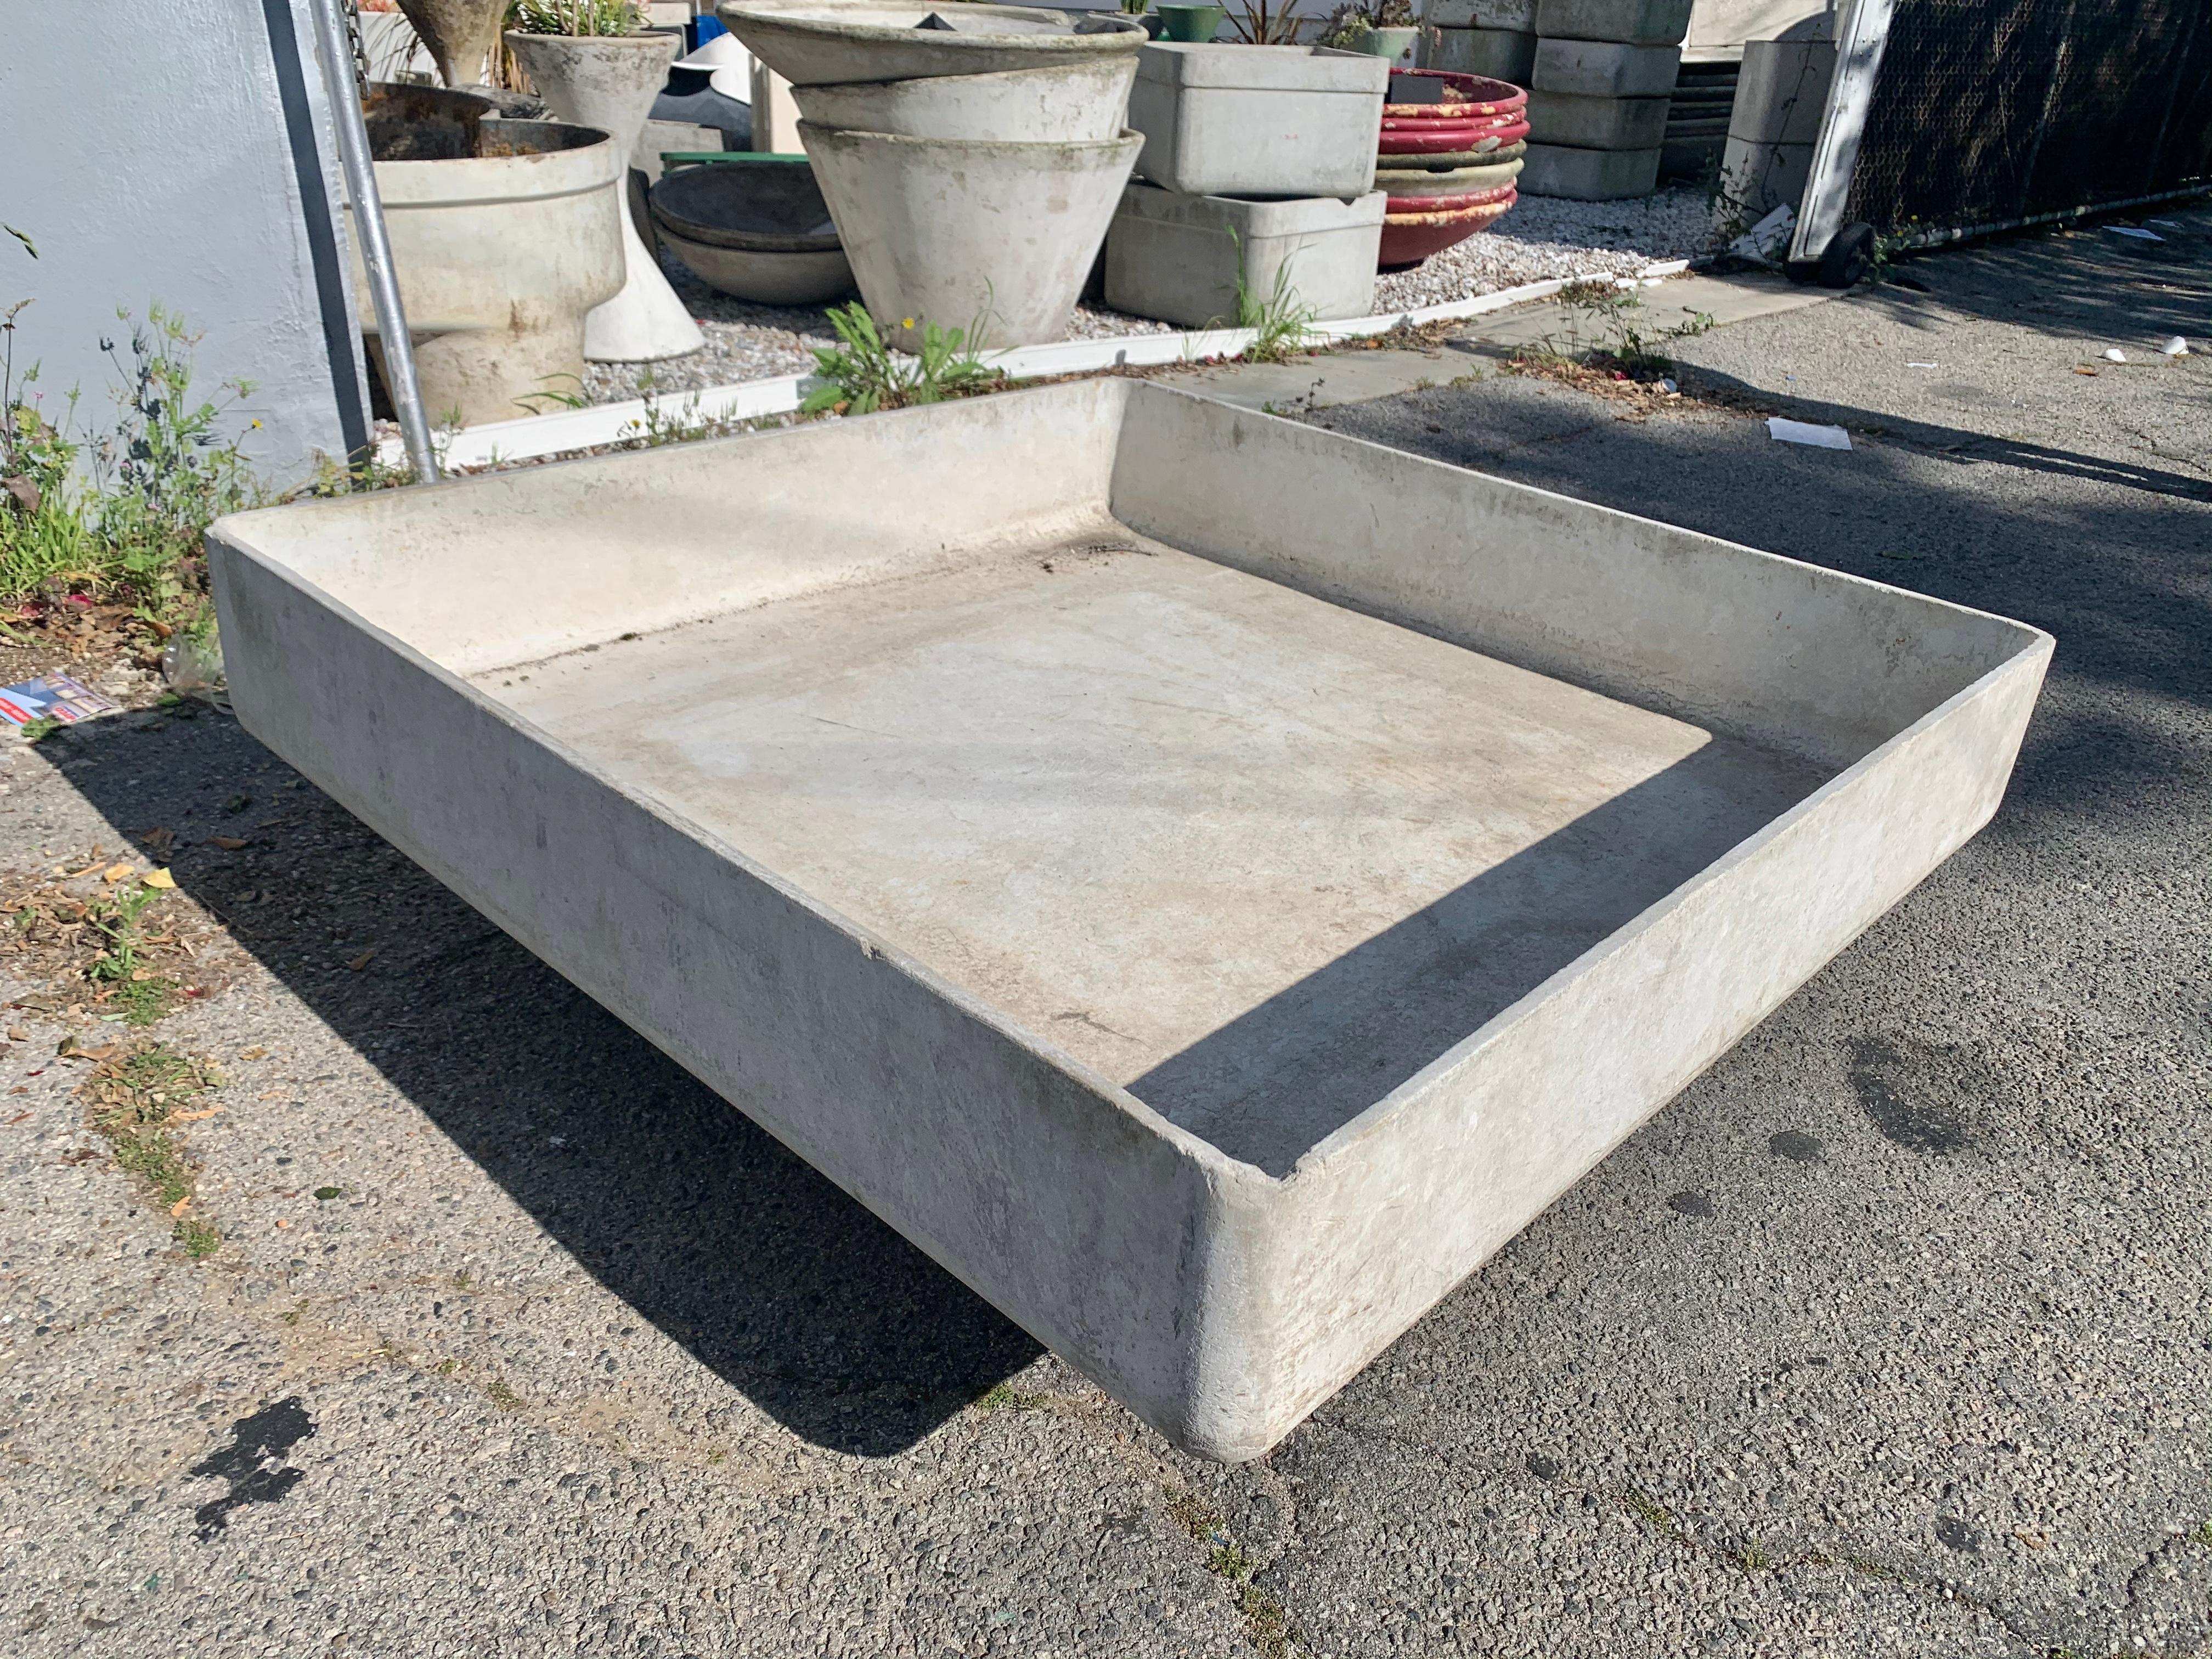 Impressive concrete sculptural pond/planter by Willy Guhl. Massive concrete square sits atop a smaller concrete square base. Could be used to accommodate a fountain, pond or plants. Good vintage condition and patina. Extremely rare piece of